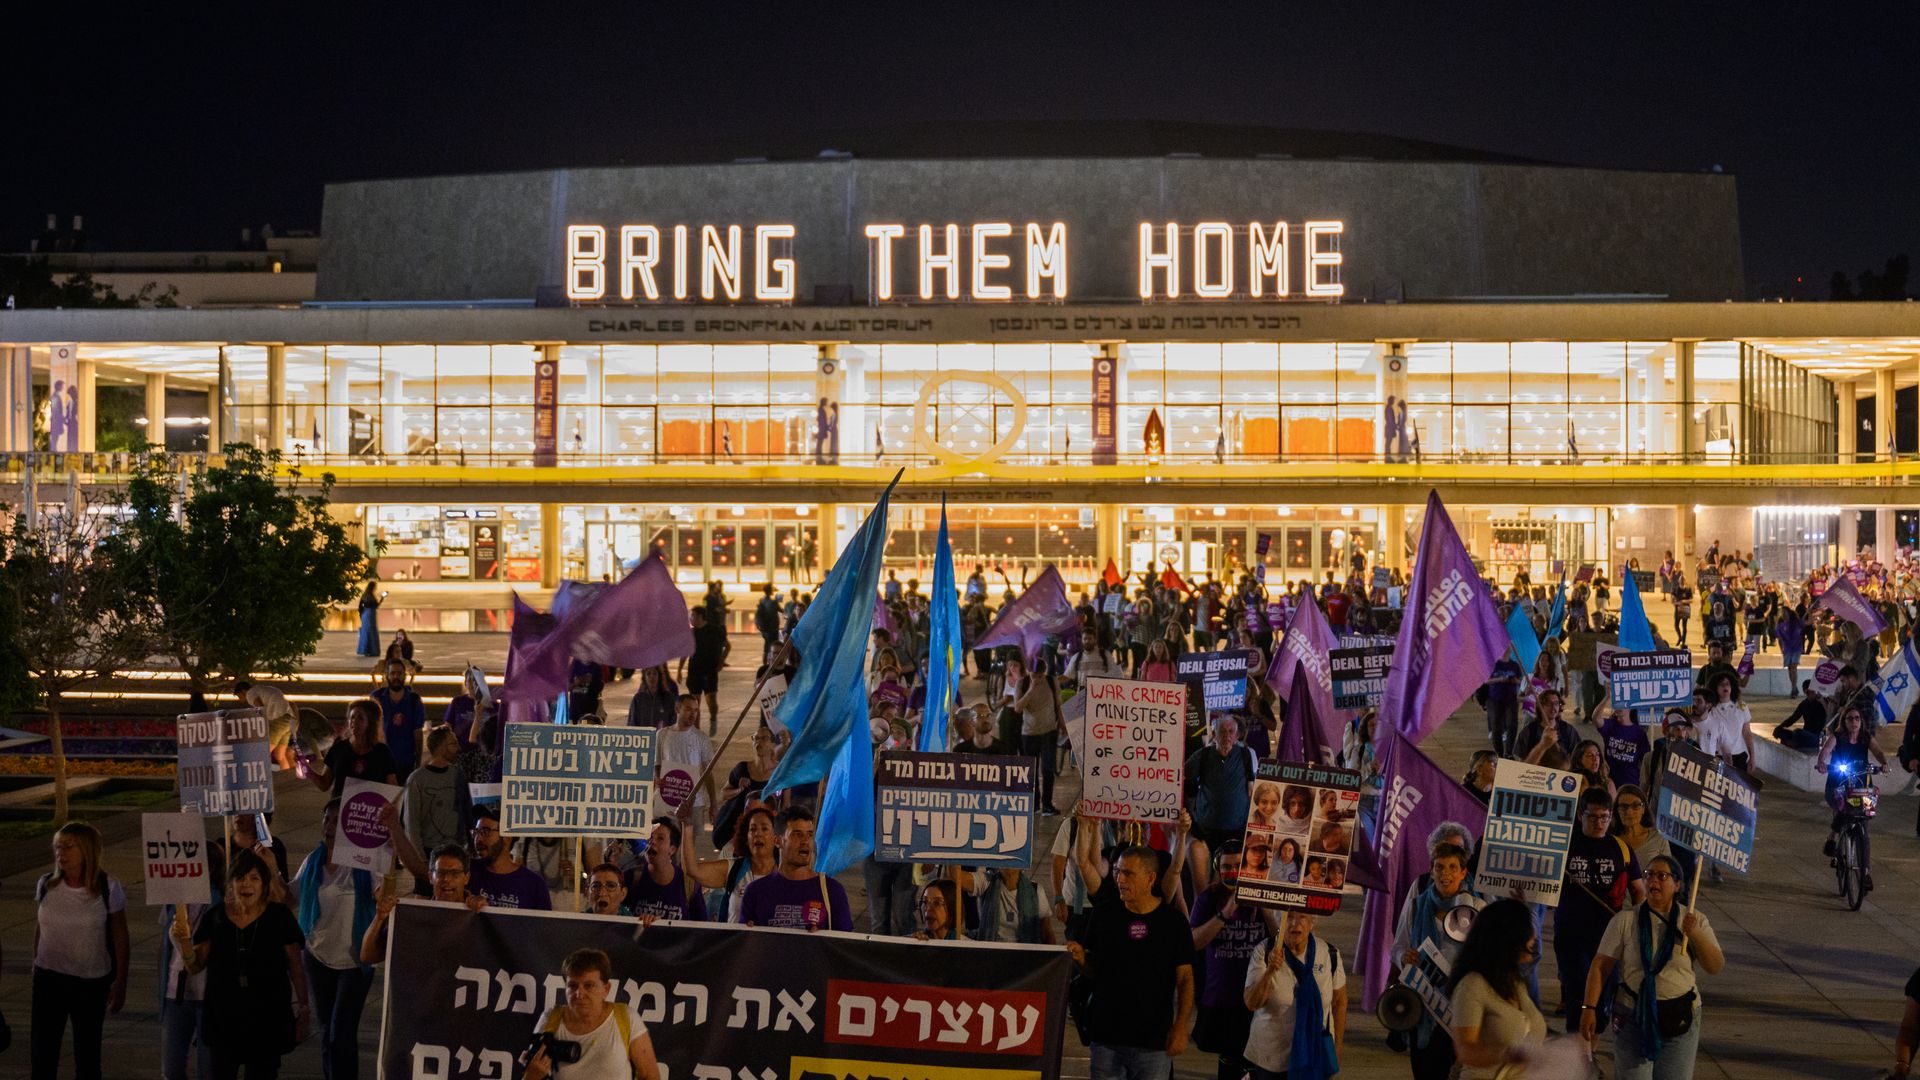 Protest in Israel to bring hostages home.